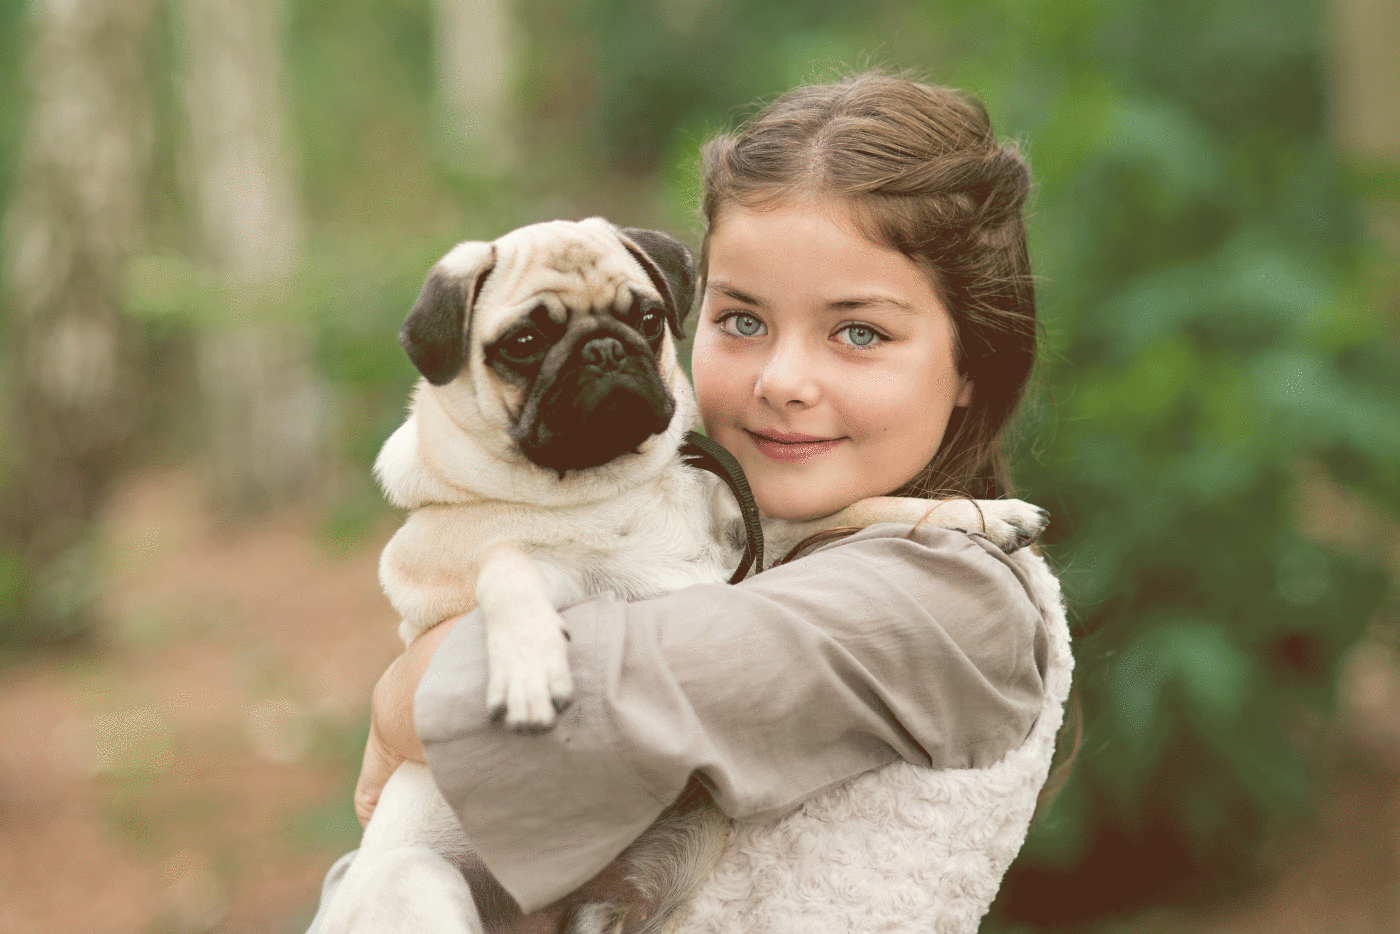 Noortje, who's got the most amazing blue eyes,  loves her dog and it shows. <br />
The two of them make a handsome pair.<br />
I love the unique connection between children and their pets.